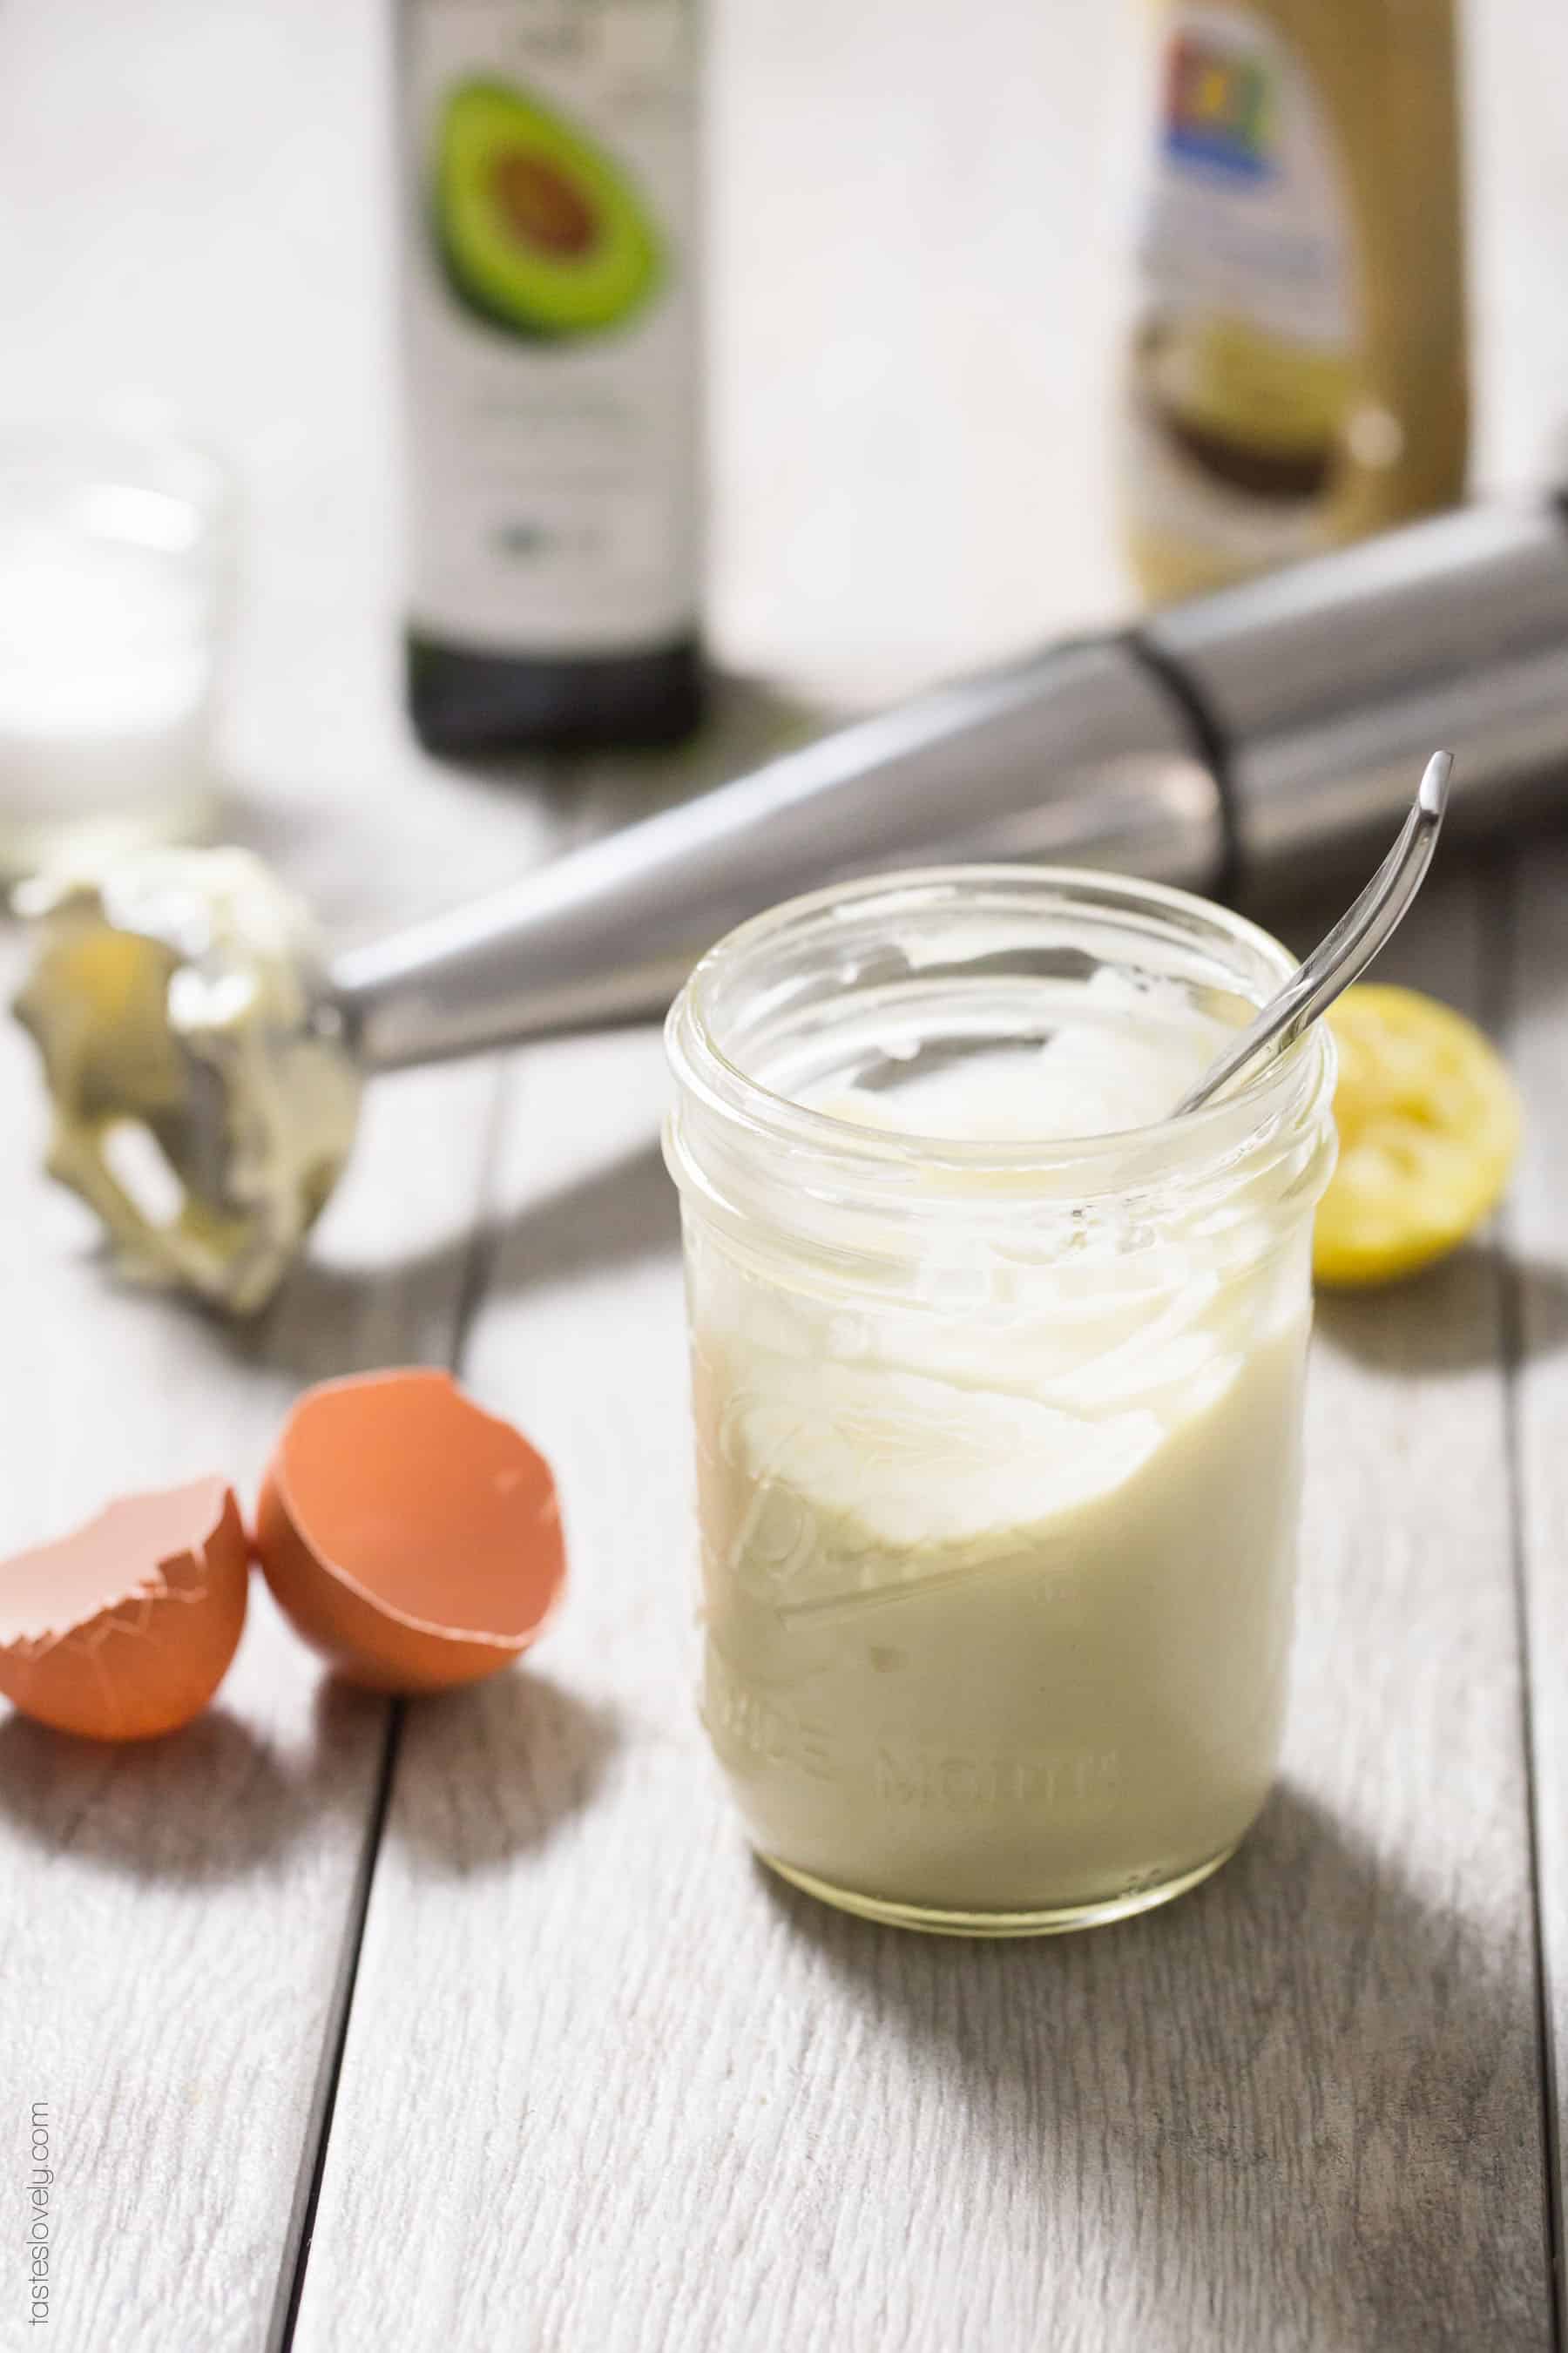 showing ingredients and tools to make homemade mayo